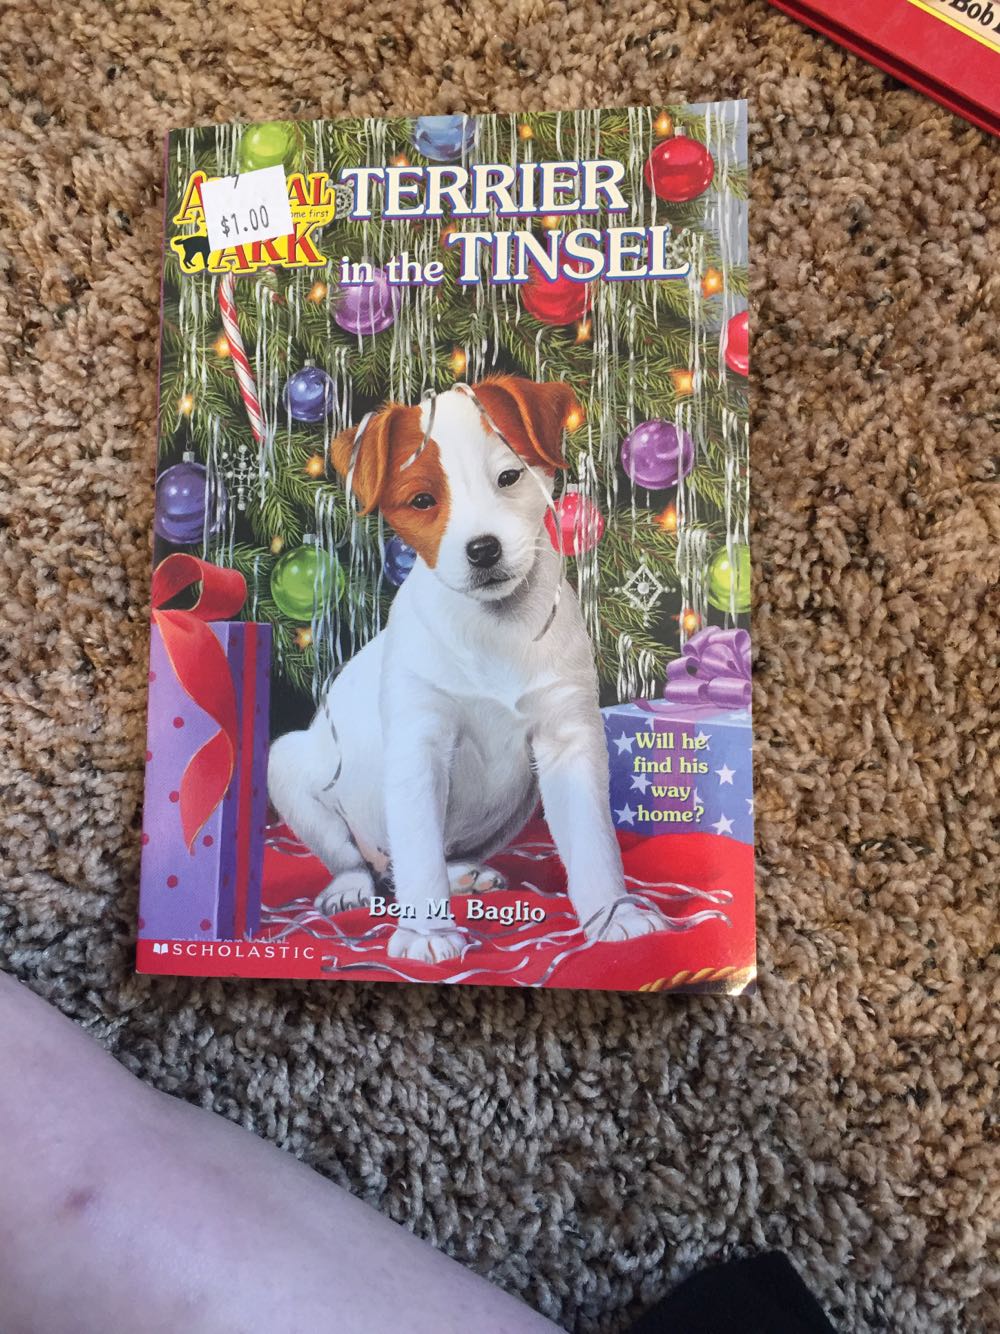 Animal Ark: Terrier In The Tinsel - Ben M. Baglio (Scholastic Press - Paperback) book collectible [Barcode 9780439448925] - Main Image 1